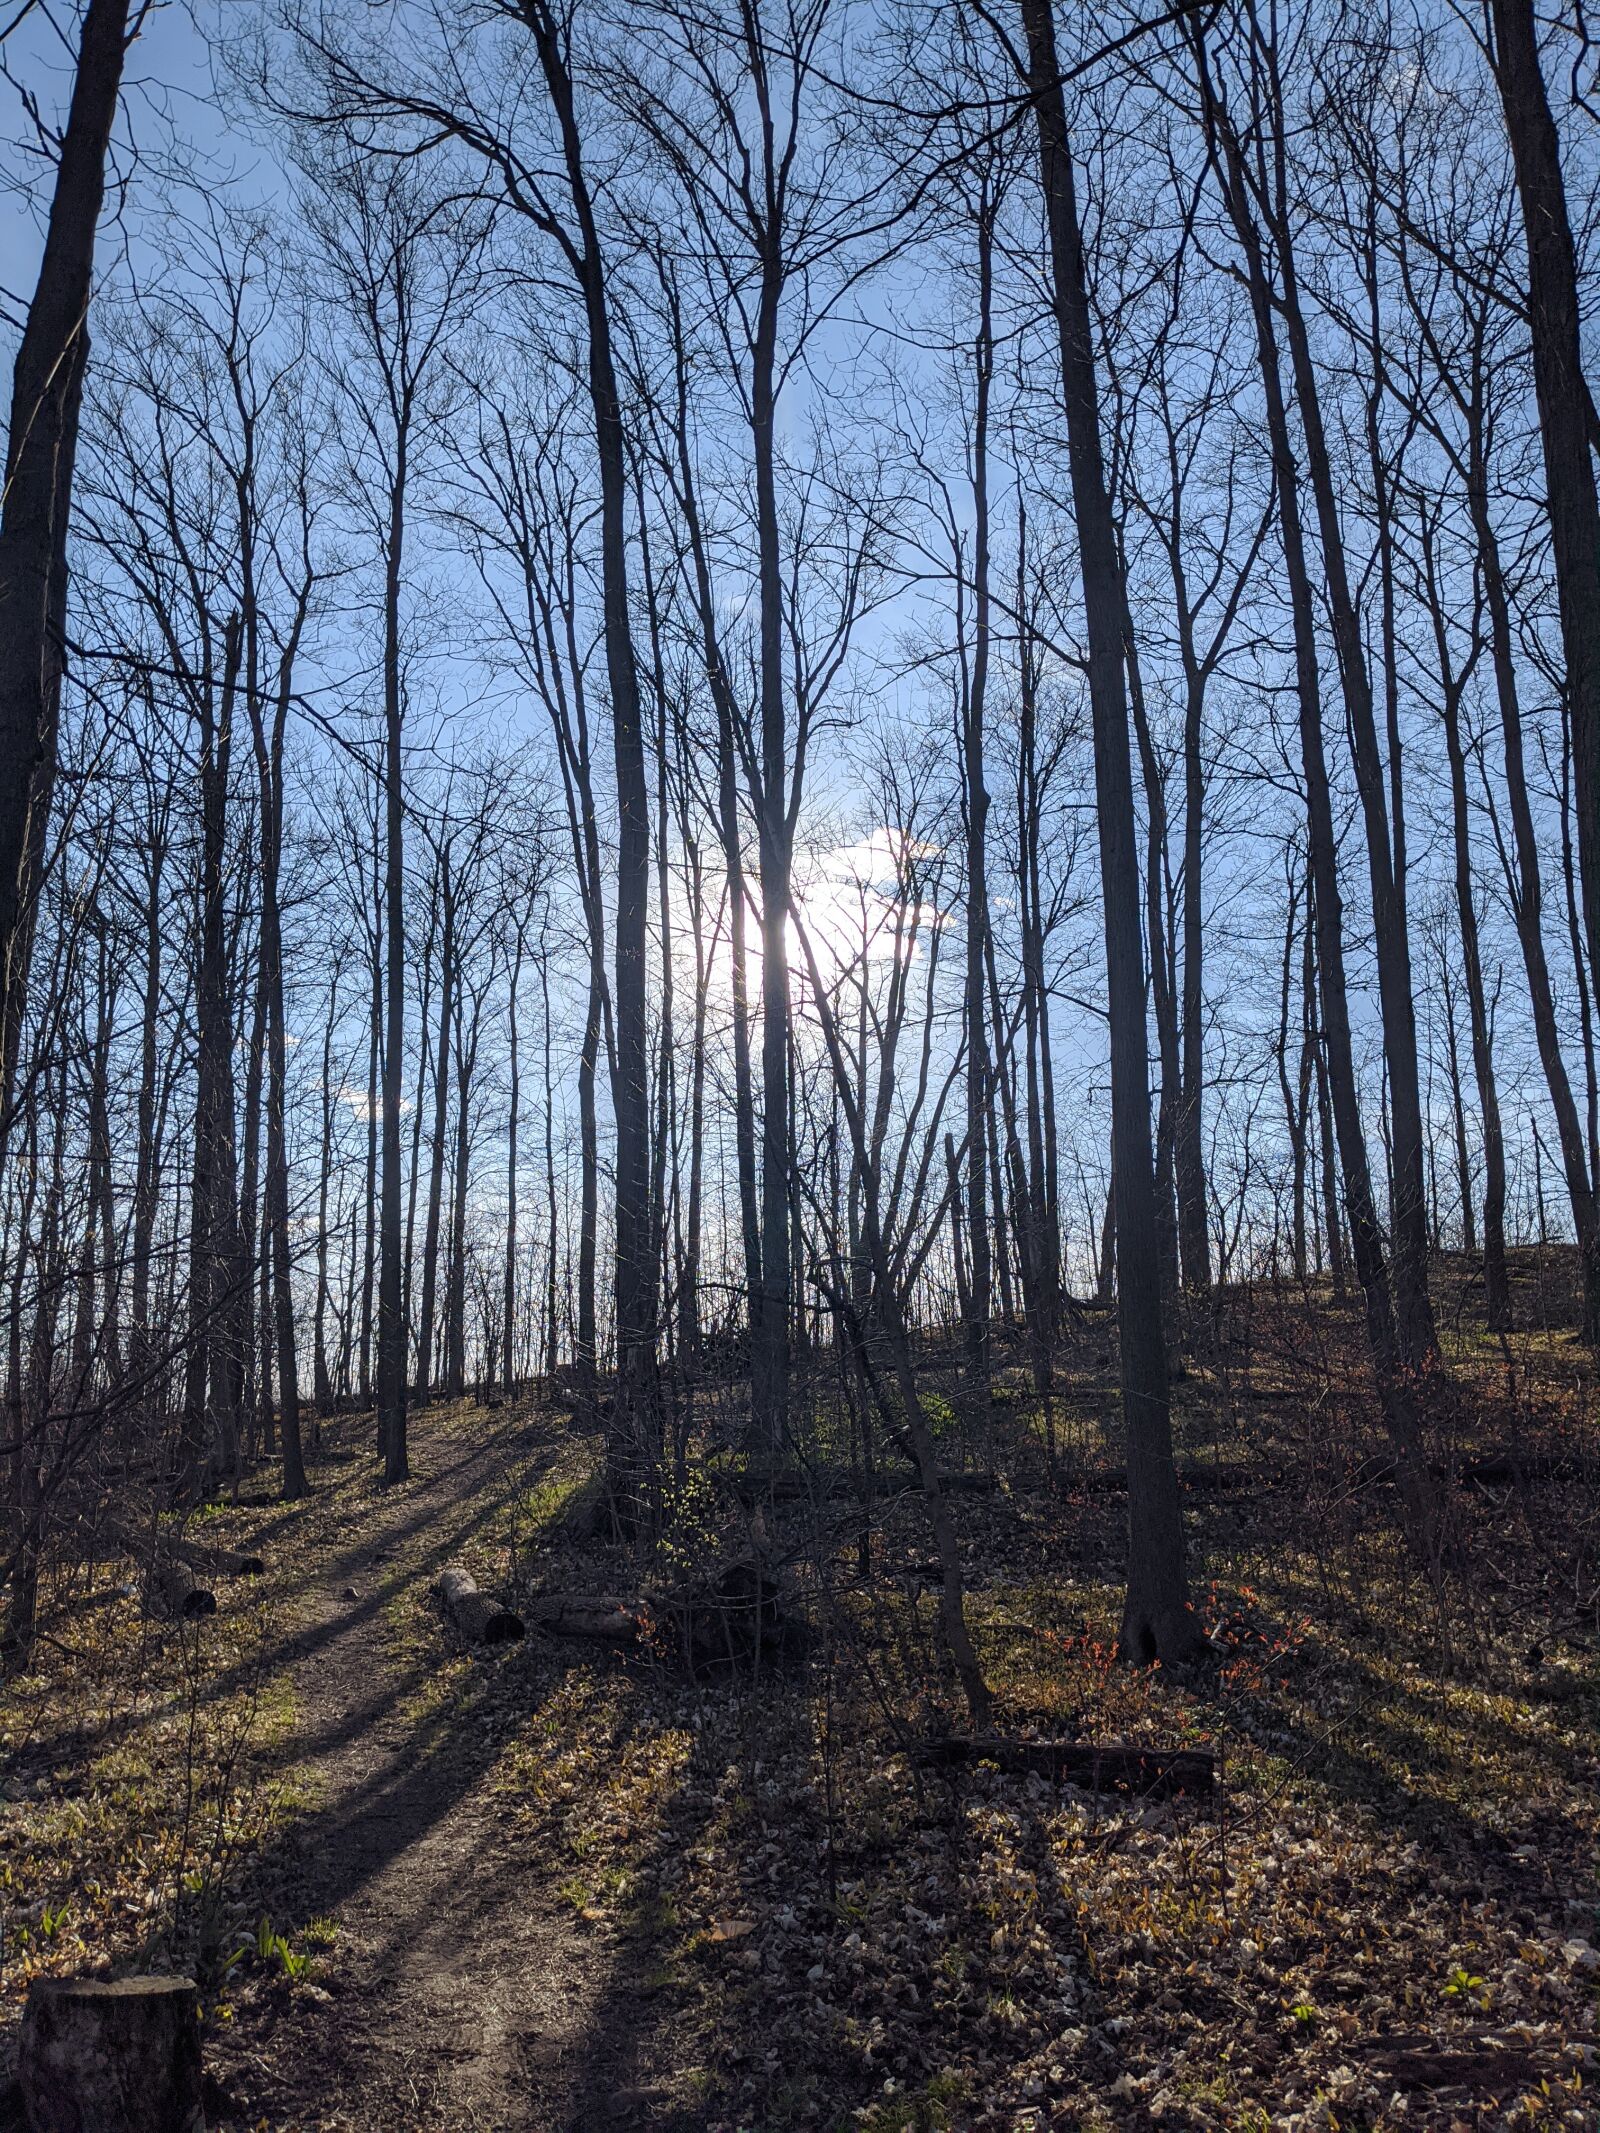 Google Pixel 4 sample photo. Trees, forest, sun photography